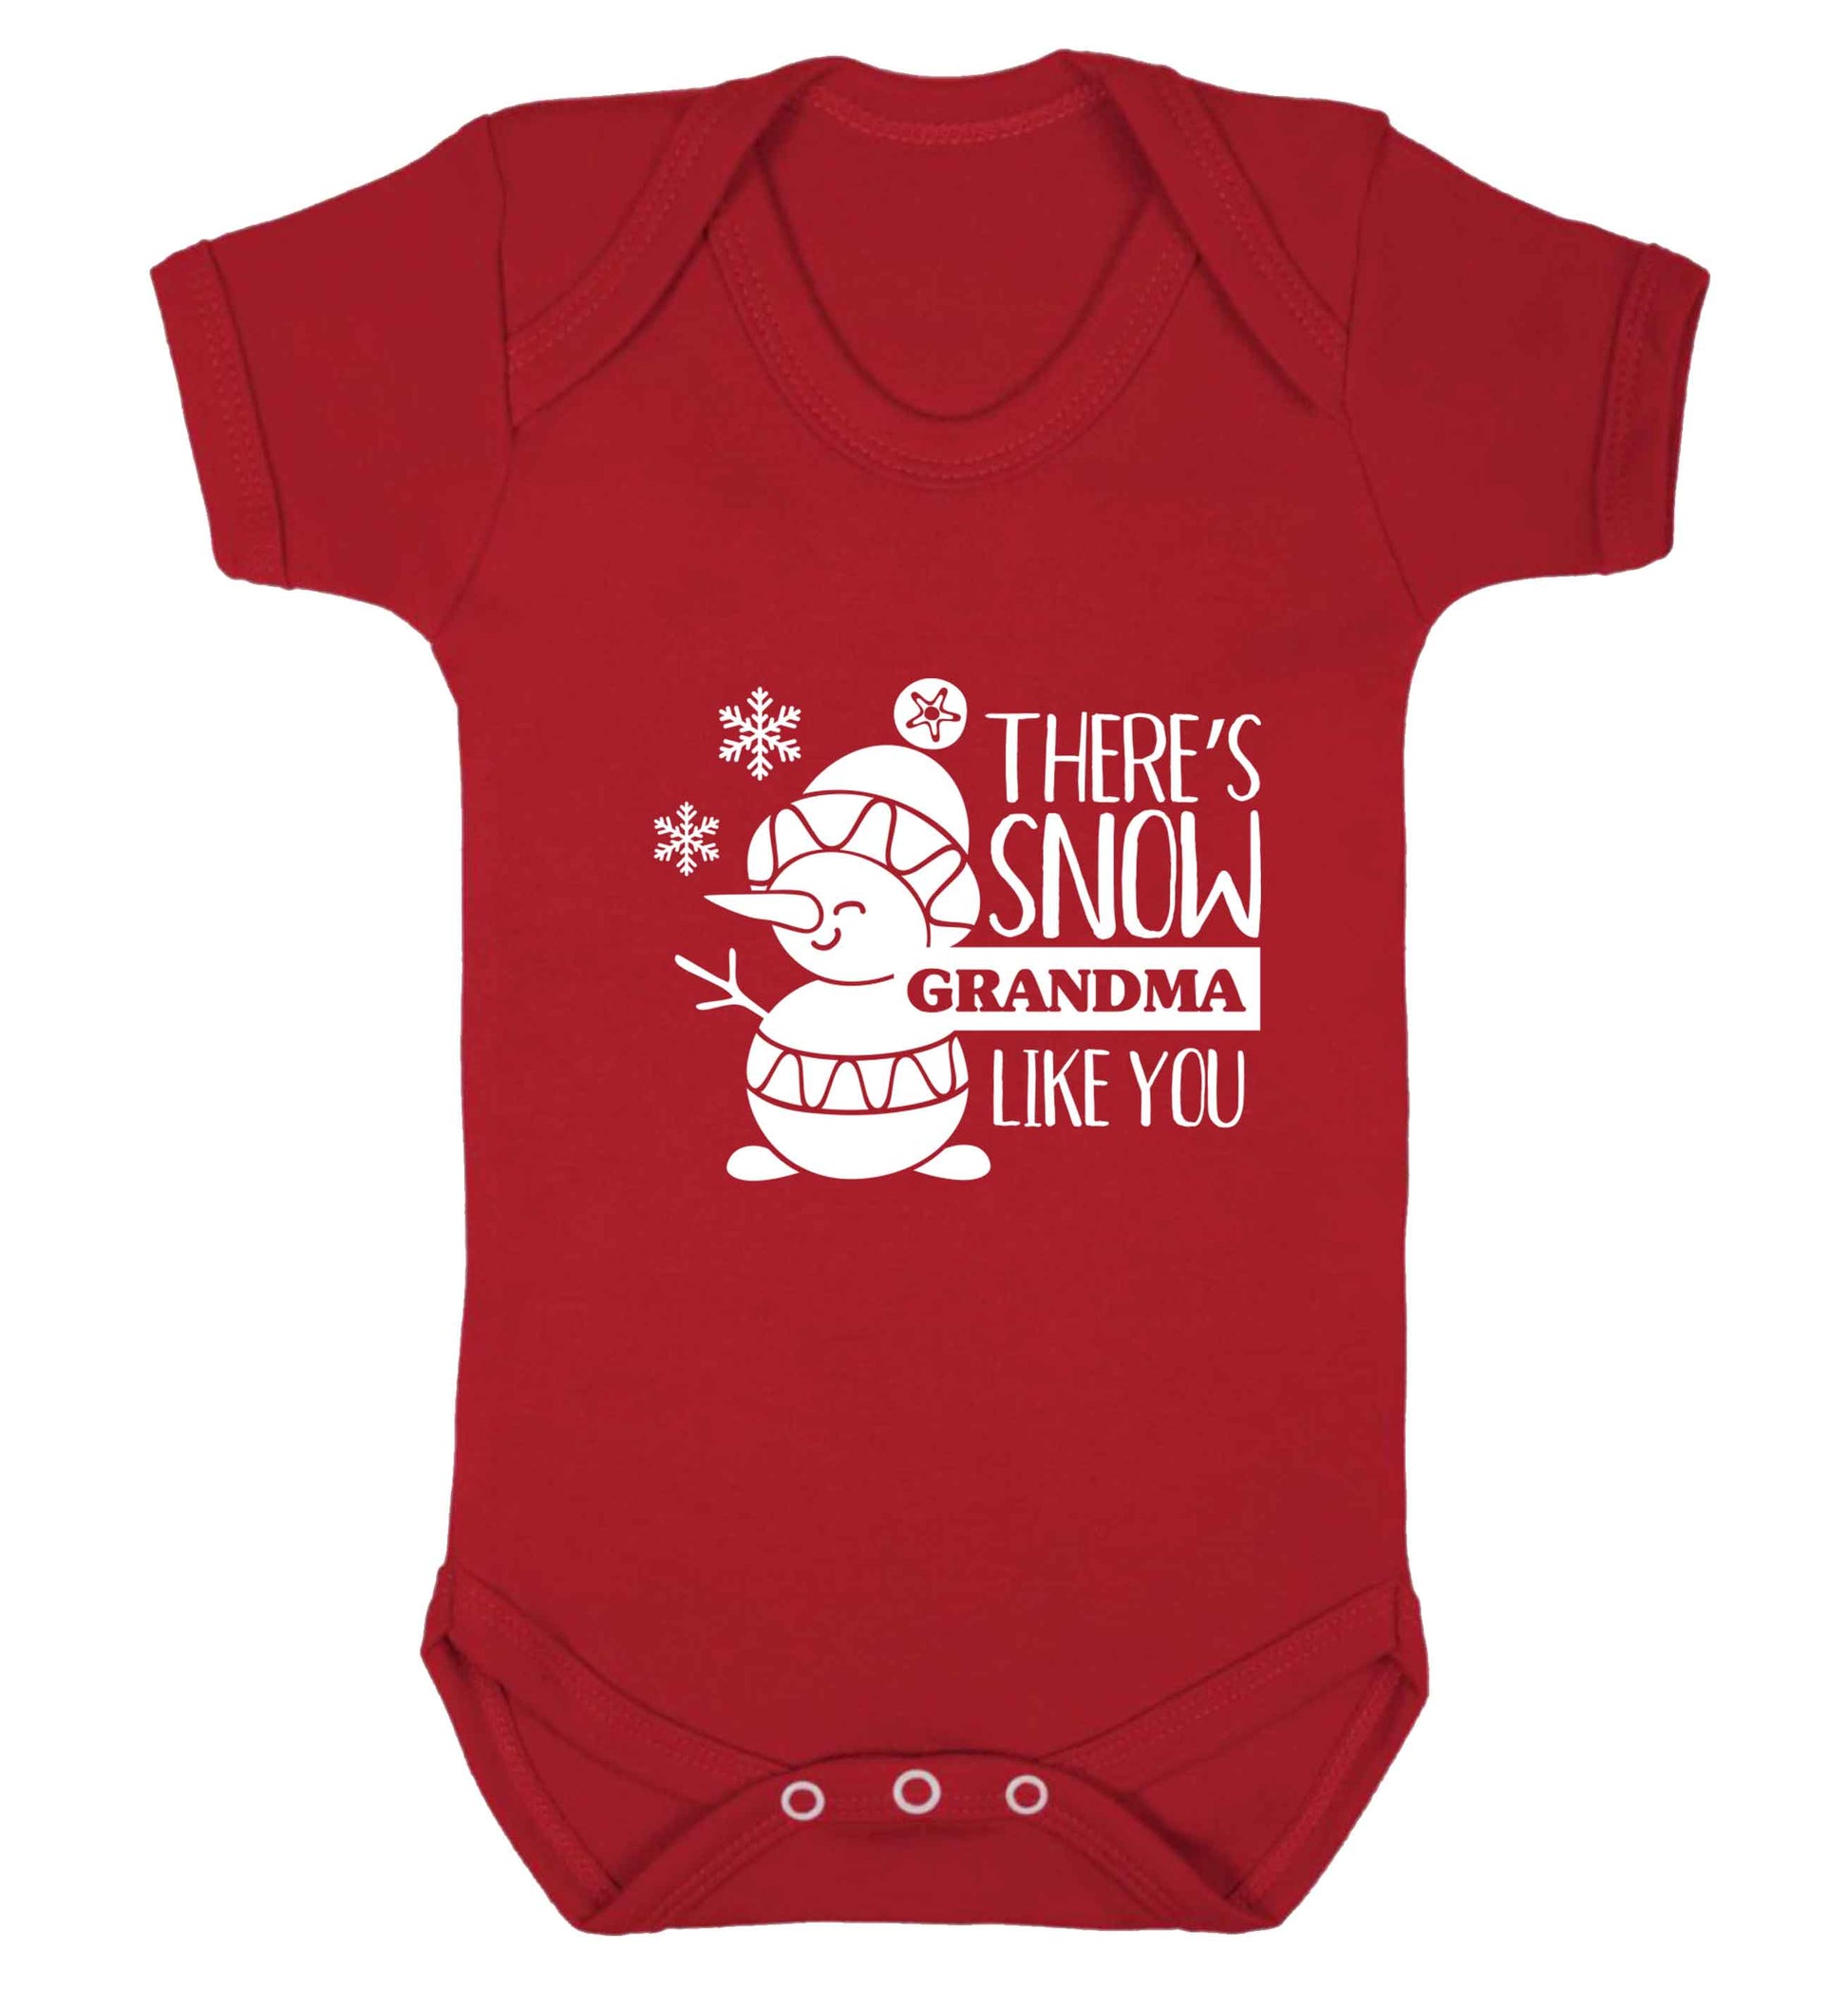 There's snow grandma like you baby vest red 18-24 months